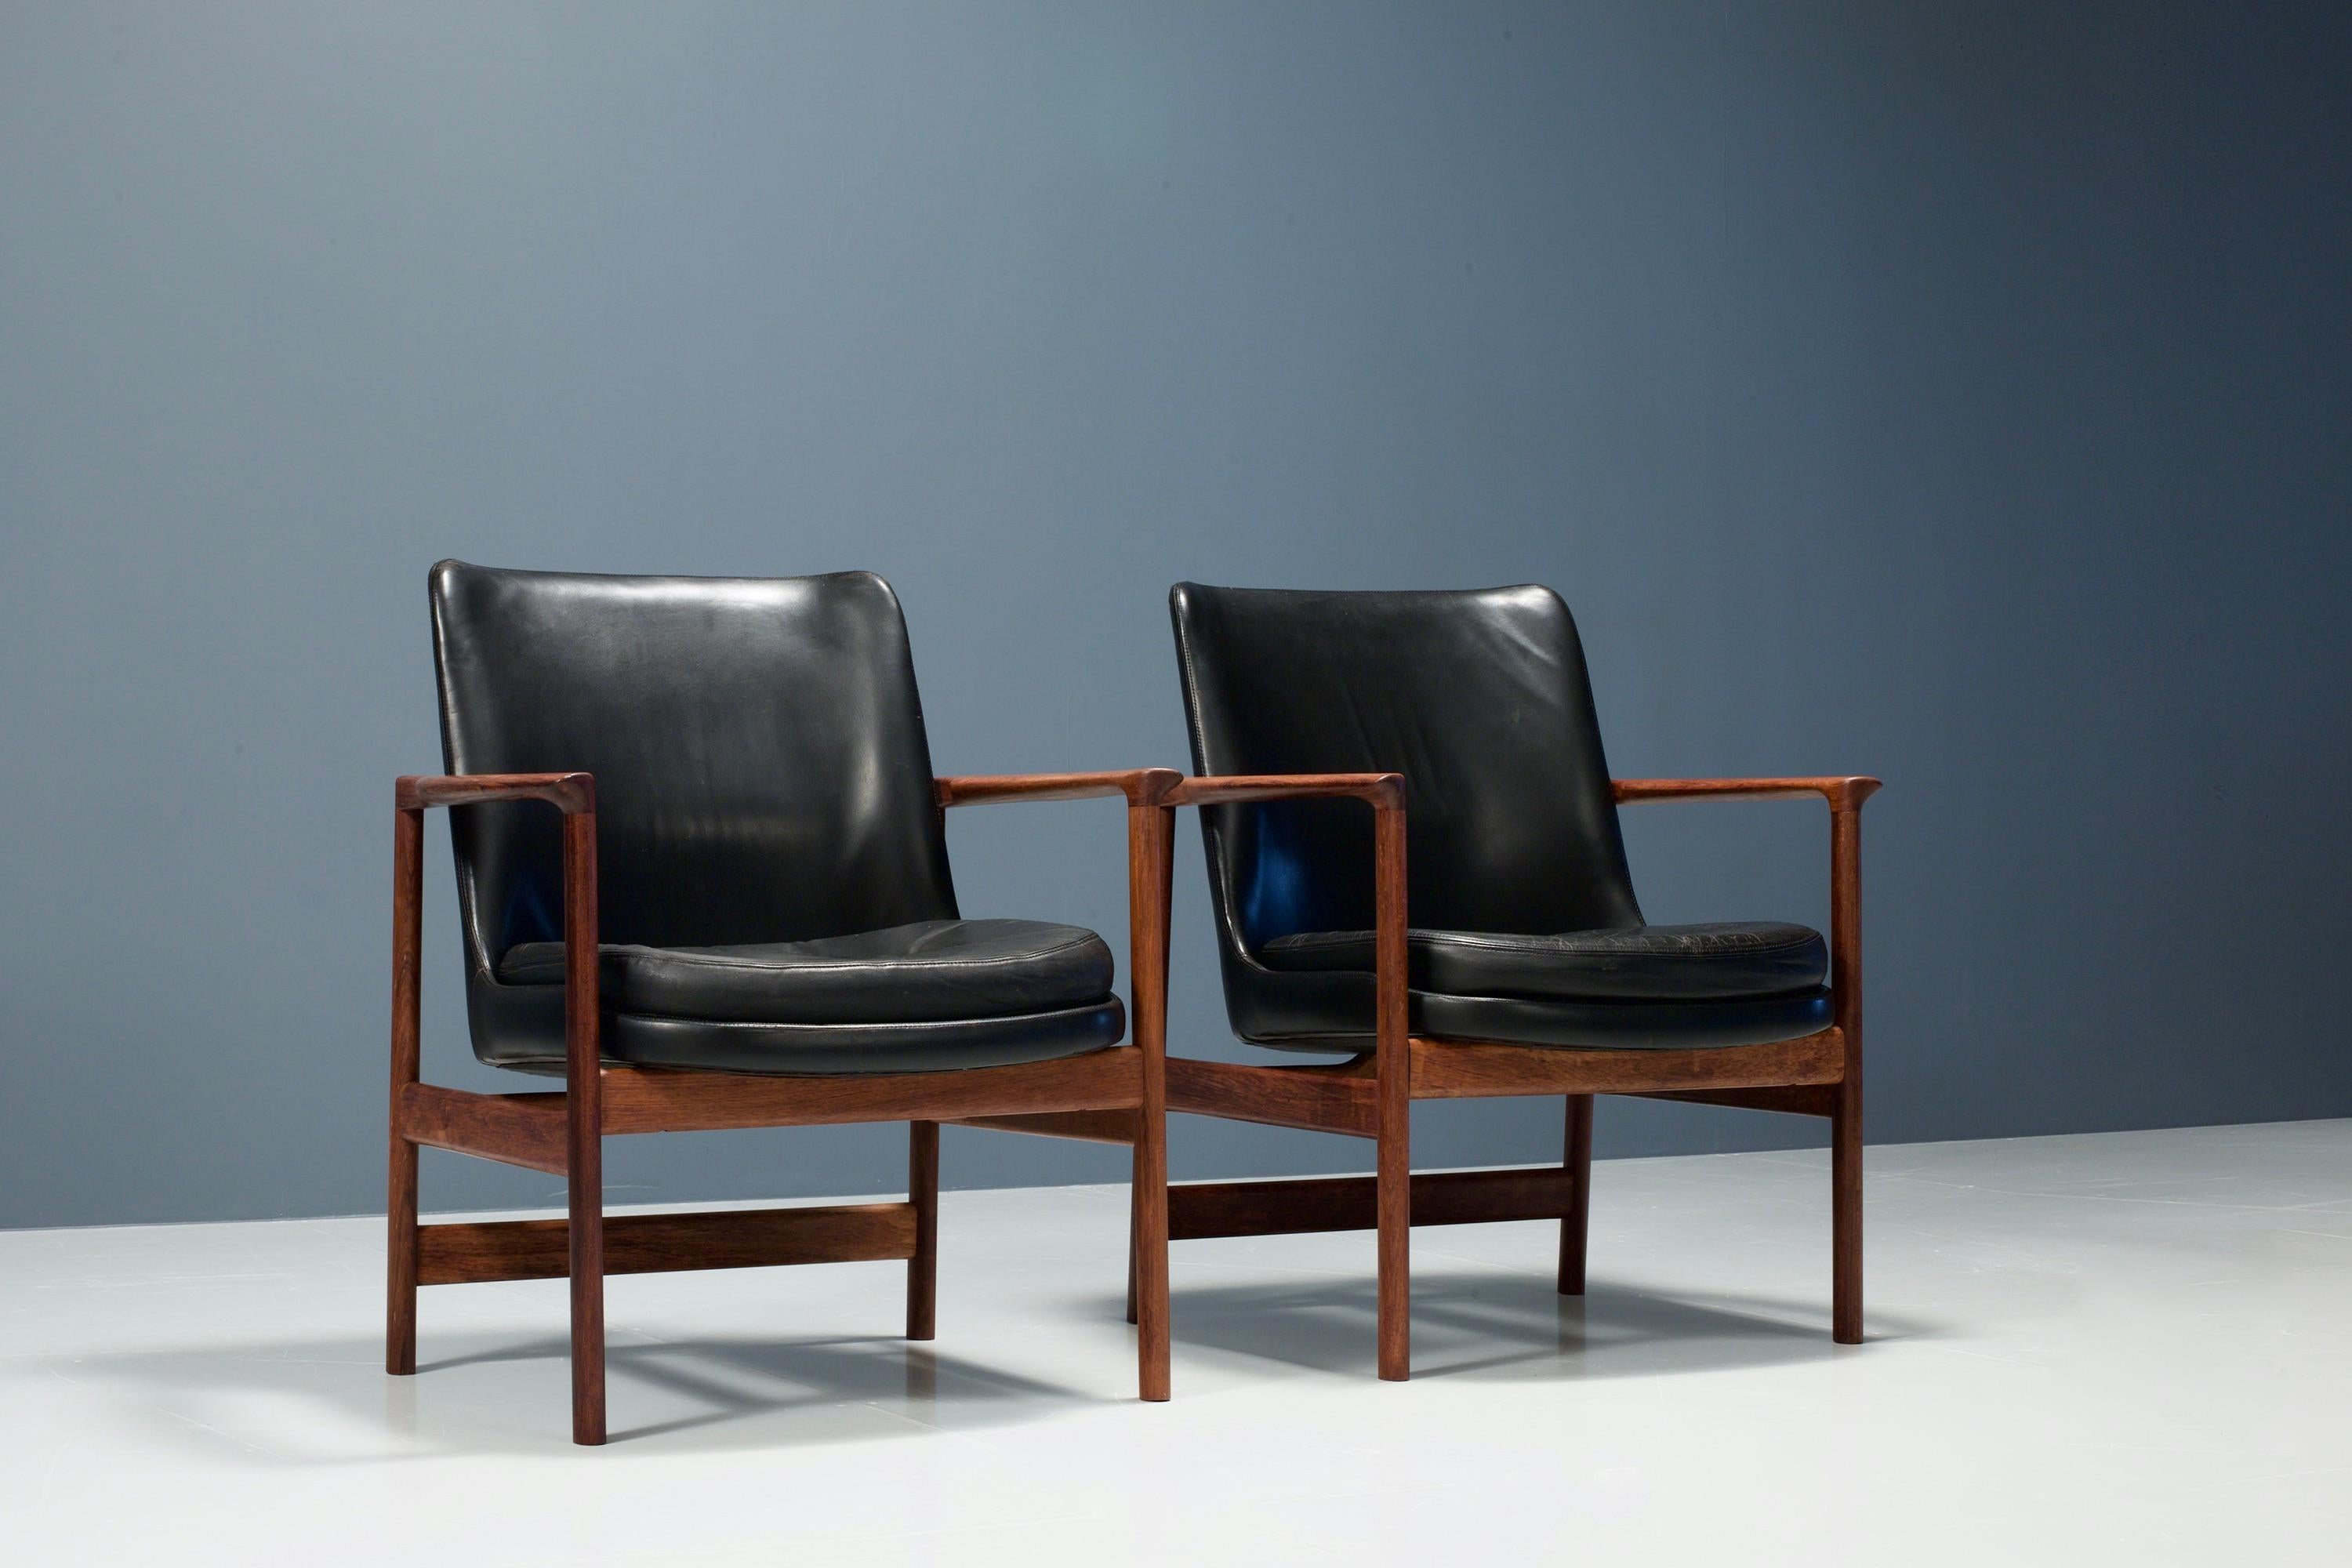 Set of two black armchairs designed by Ib Kofod-Larsen with leather and teak from Denmark, 1960s. These chairs are manufactured by Froscher KG. The chairs are in good condition and have been fully restored using the original leather of course.
Both